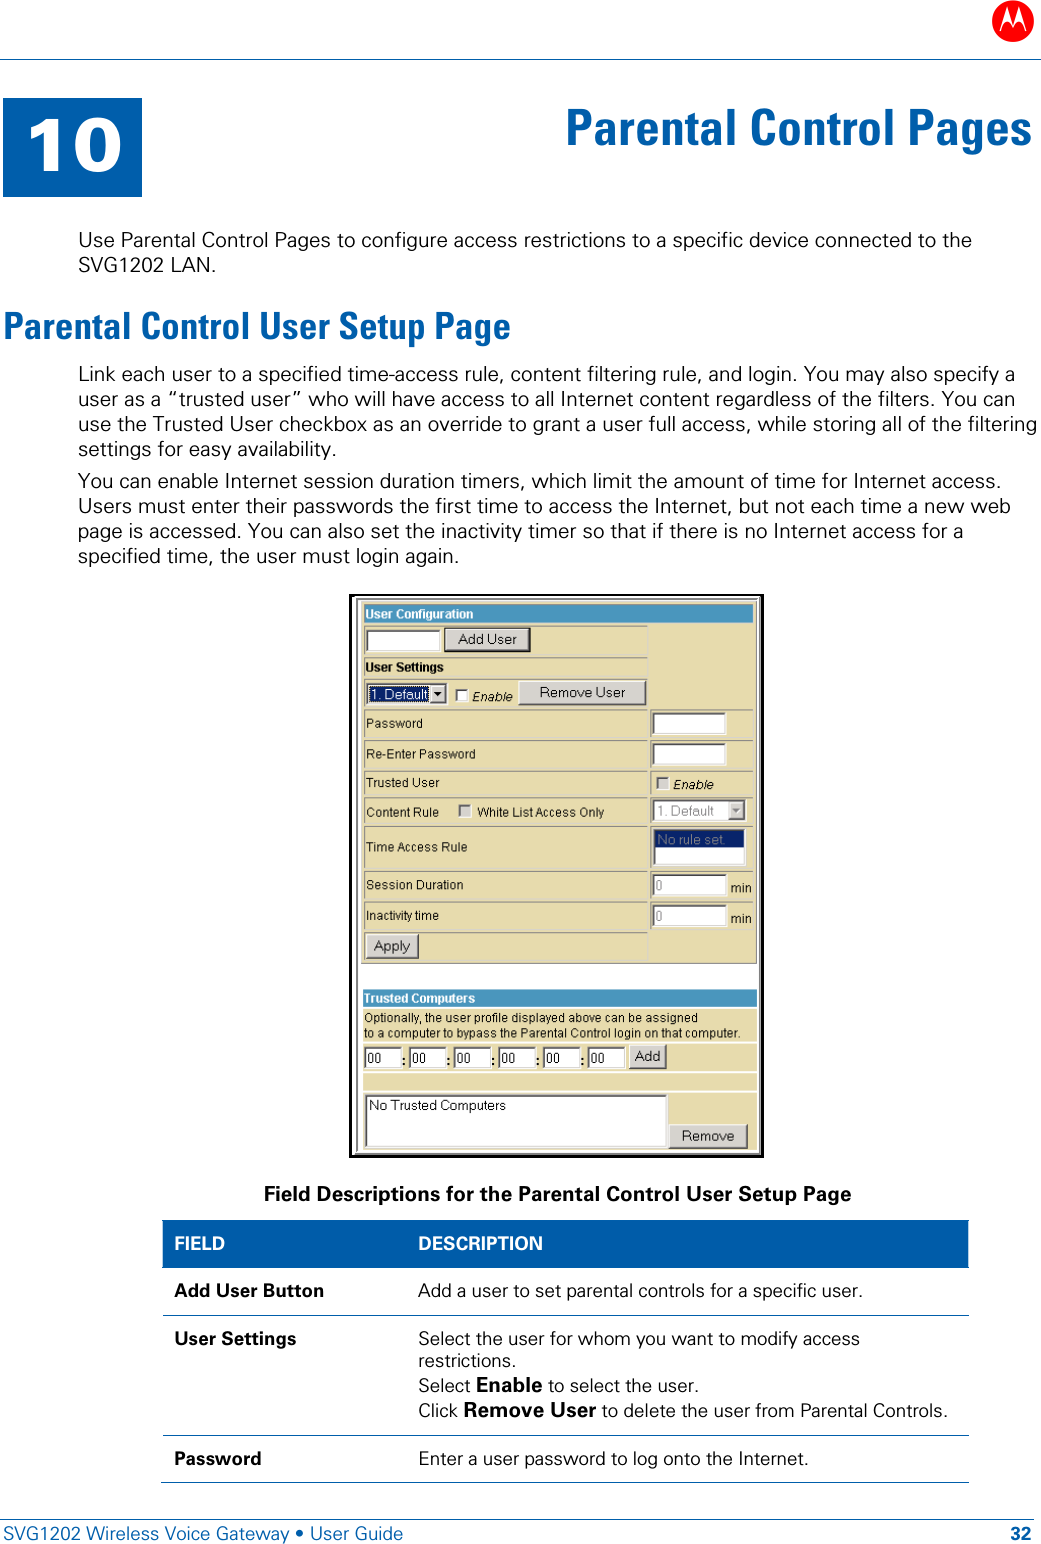 B   SVG1202 Wireless Voice Gateway • User Guide 32  10 Parental Control Pages  Use Parental Control Pages to configure access restrictions to a specific device connected to the SVG1202 LAN. Parental Control User Setup Page Link each user to a specified time-access rule, content filtering rule, and login. You may also specify a user as a “trusted user” who will have access to all Internet content regardless of the filters. You can use the Trusted User checkbox as an override to grant a user full access, while storing all of the filtering settings for easy availability. You can enable Internet session duration timers, which limit the amount of time for Internet access. Users must enter their passwords the first time to access the Internet, but not each time a new web page is accessed. You can also set the inactivity timer so that if there is no Internet access for a specified time, the user must login again.  Field Descriptions for the Parental Control User Setup Page FIELD  DESCRIPTION Add User Button Add a user to set parental controls for a specific user. User Settings Select the user for whom you want to modify access restrictions. Select Enable to select the user. Click Remove User to delete the user from Parental Controls.  Password Enter a user password to log onto the Internet. 